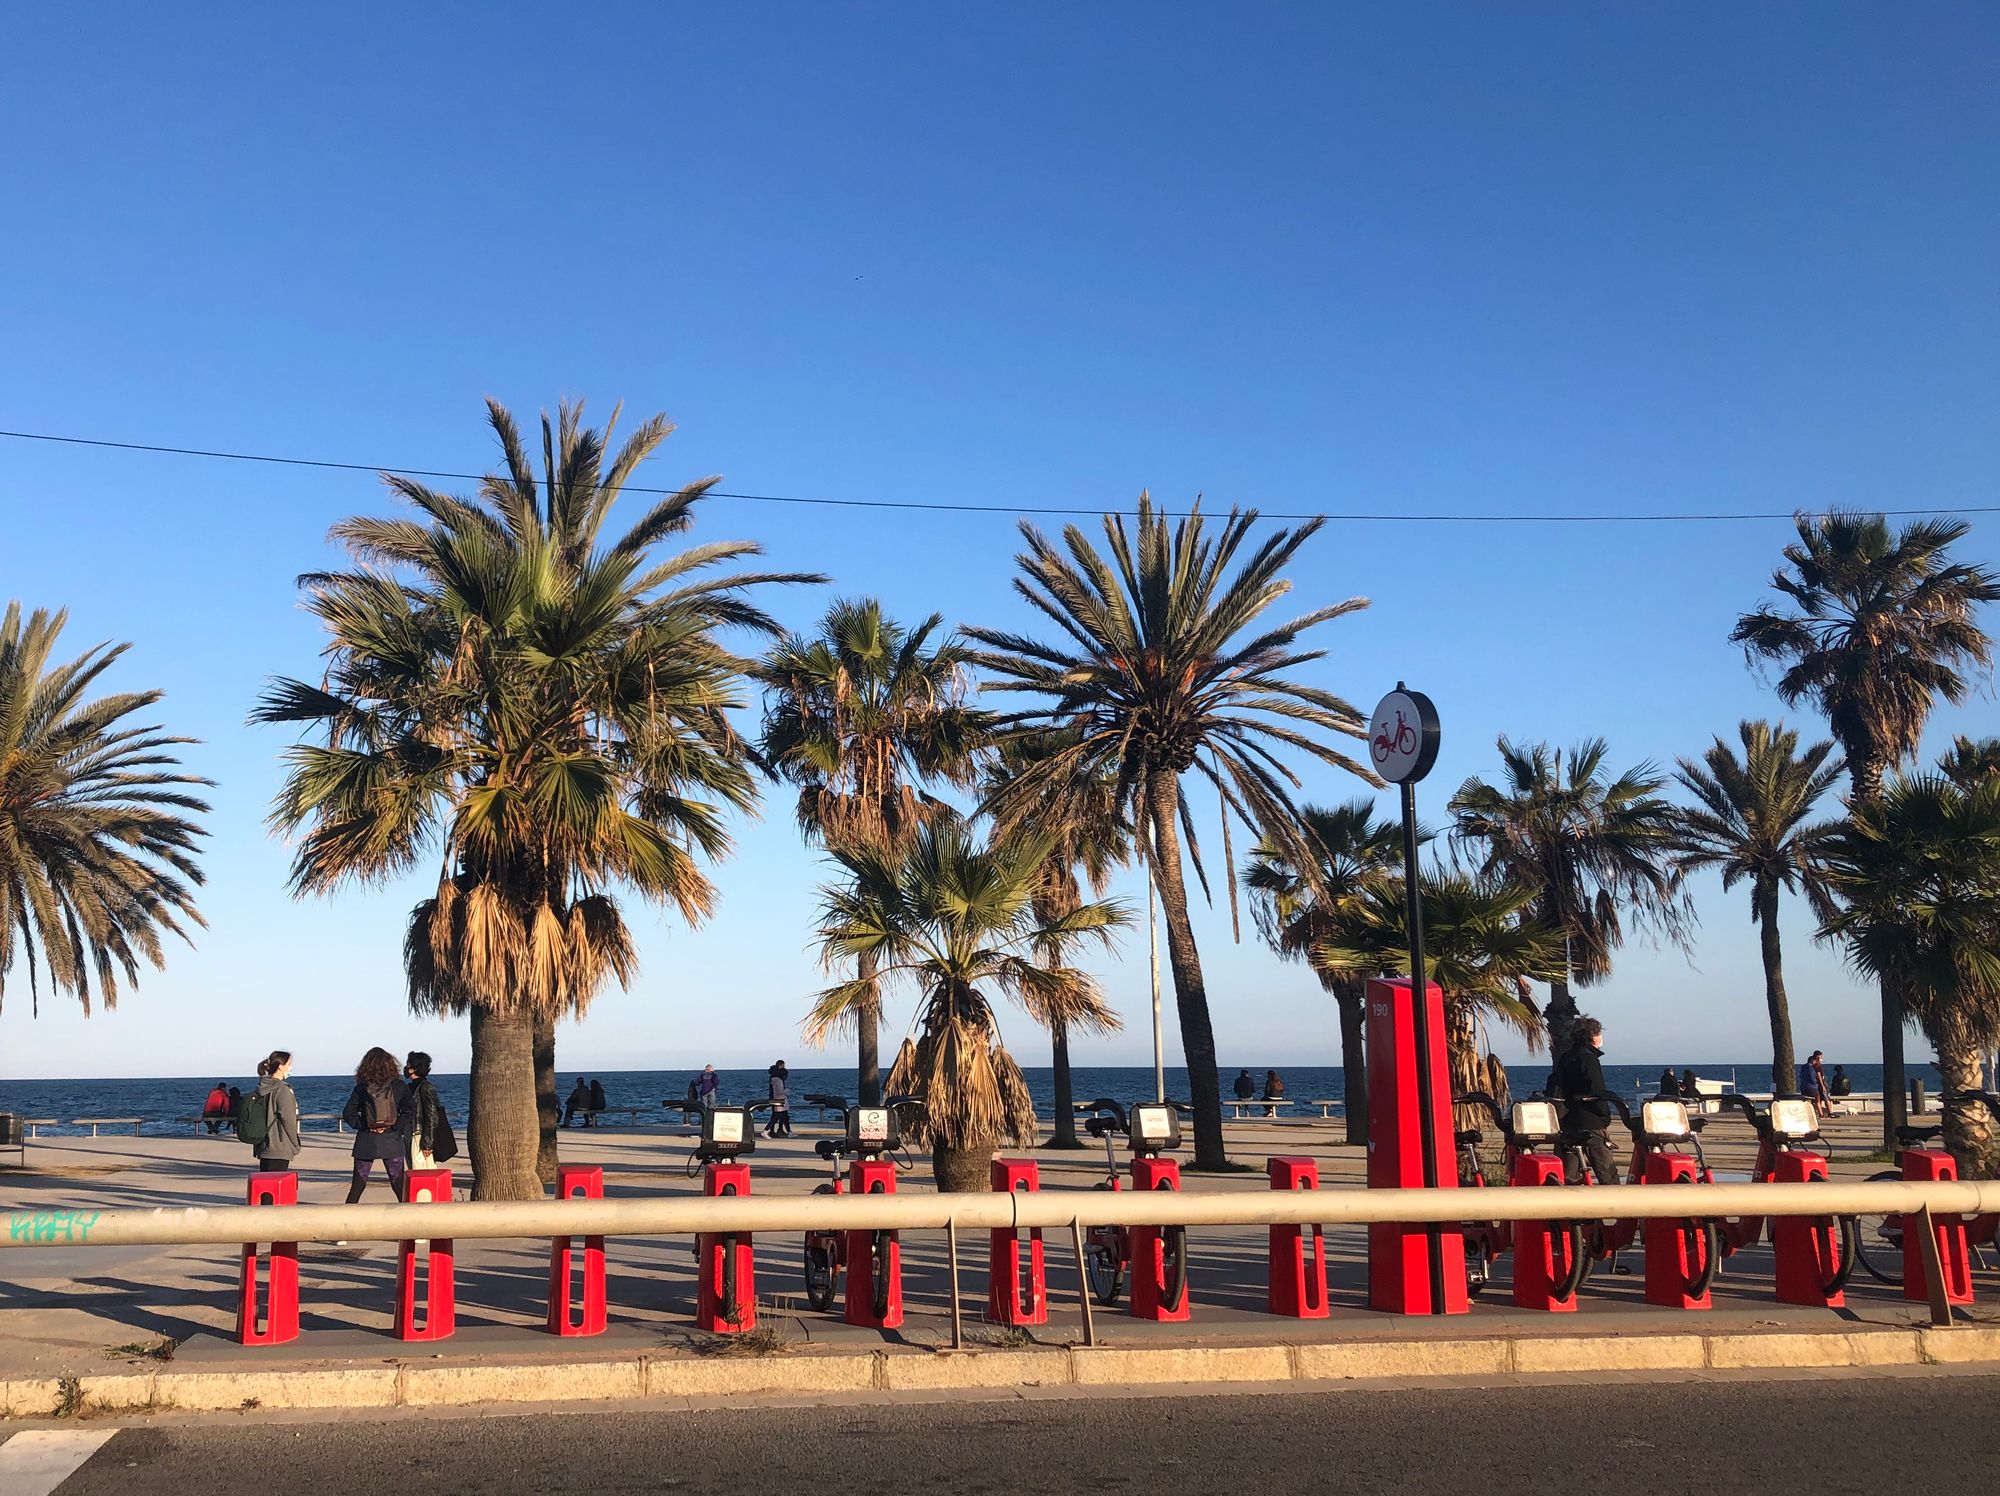 A red Bicing bike dock in front of palm trees on Bogatell beach in Barcelona